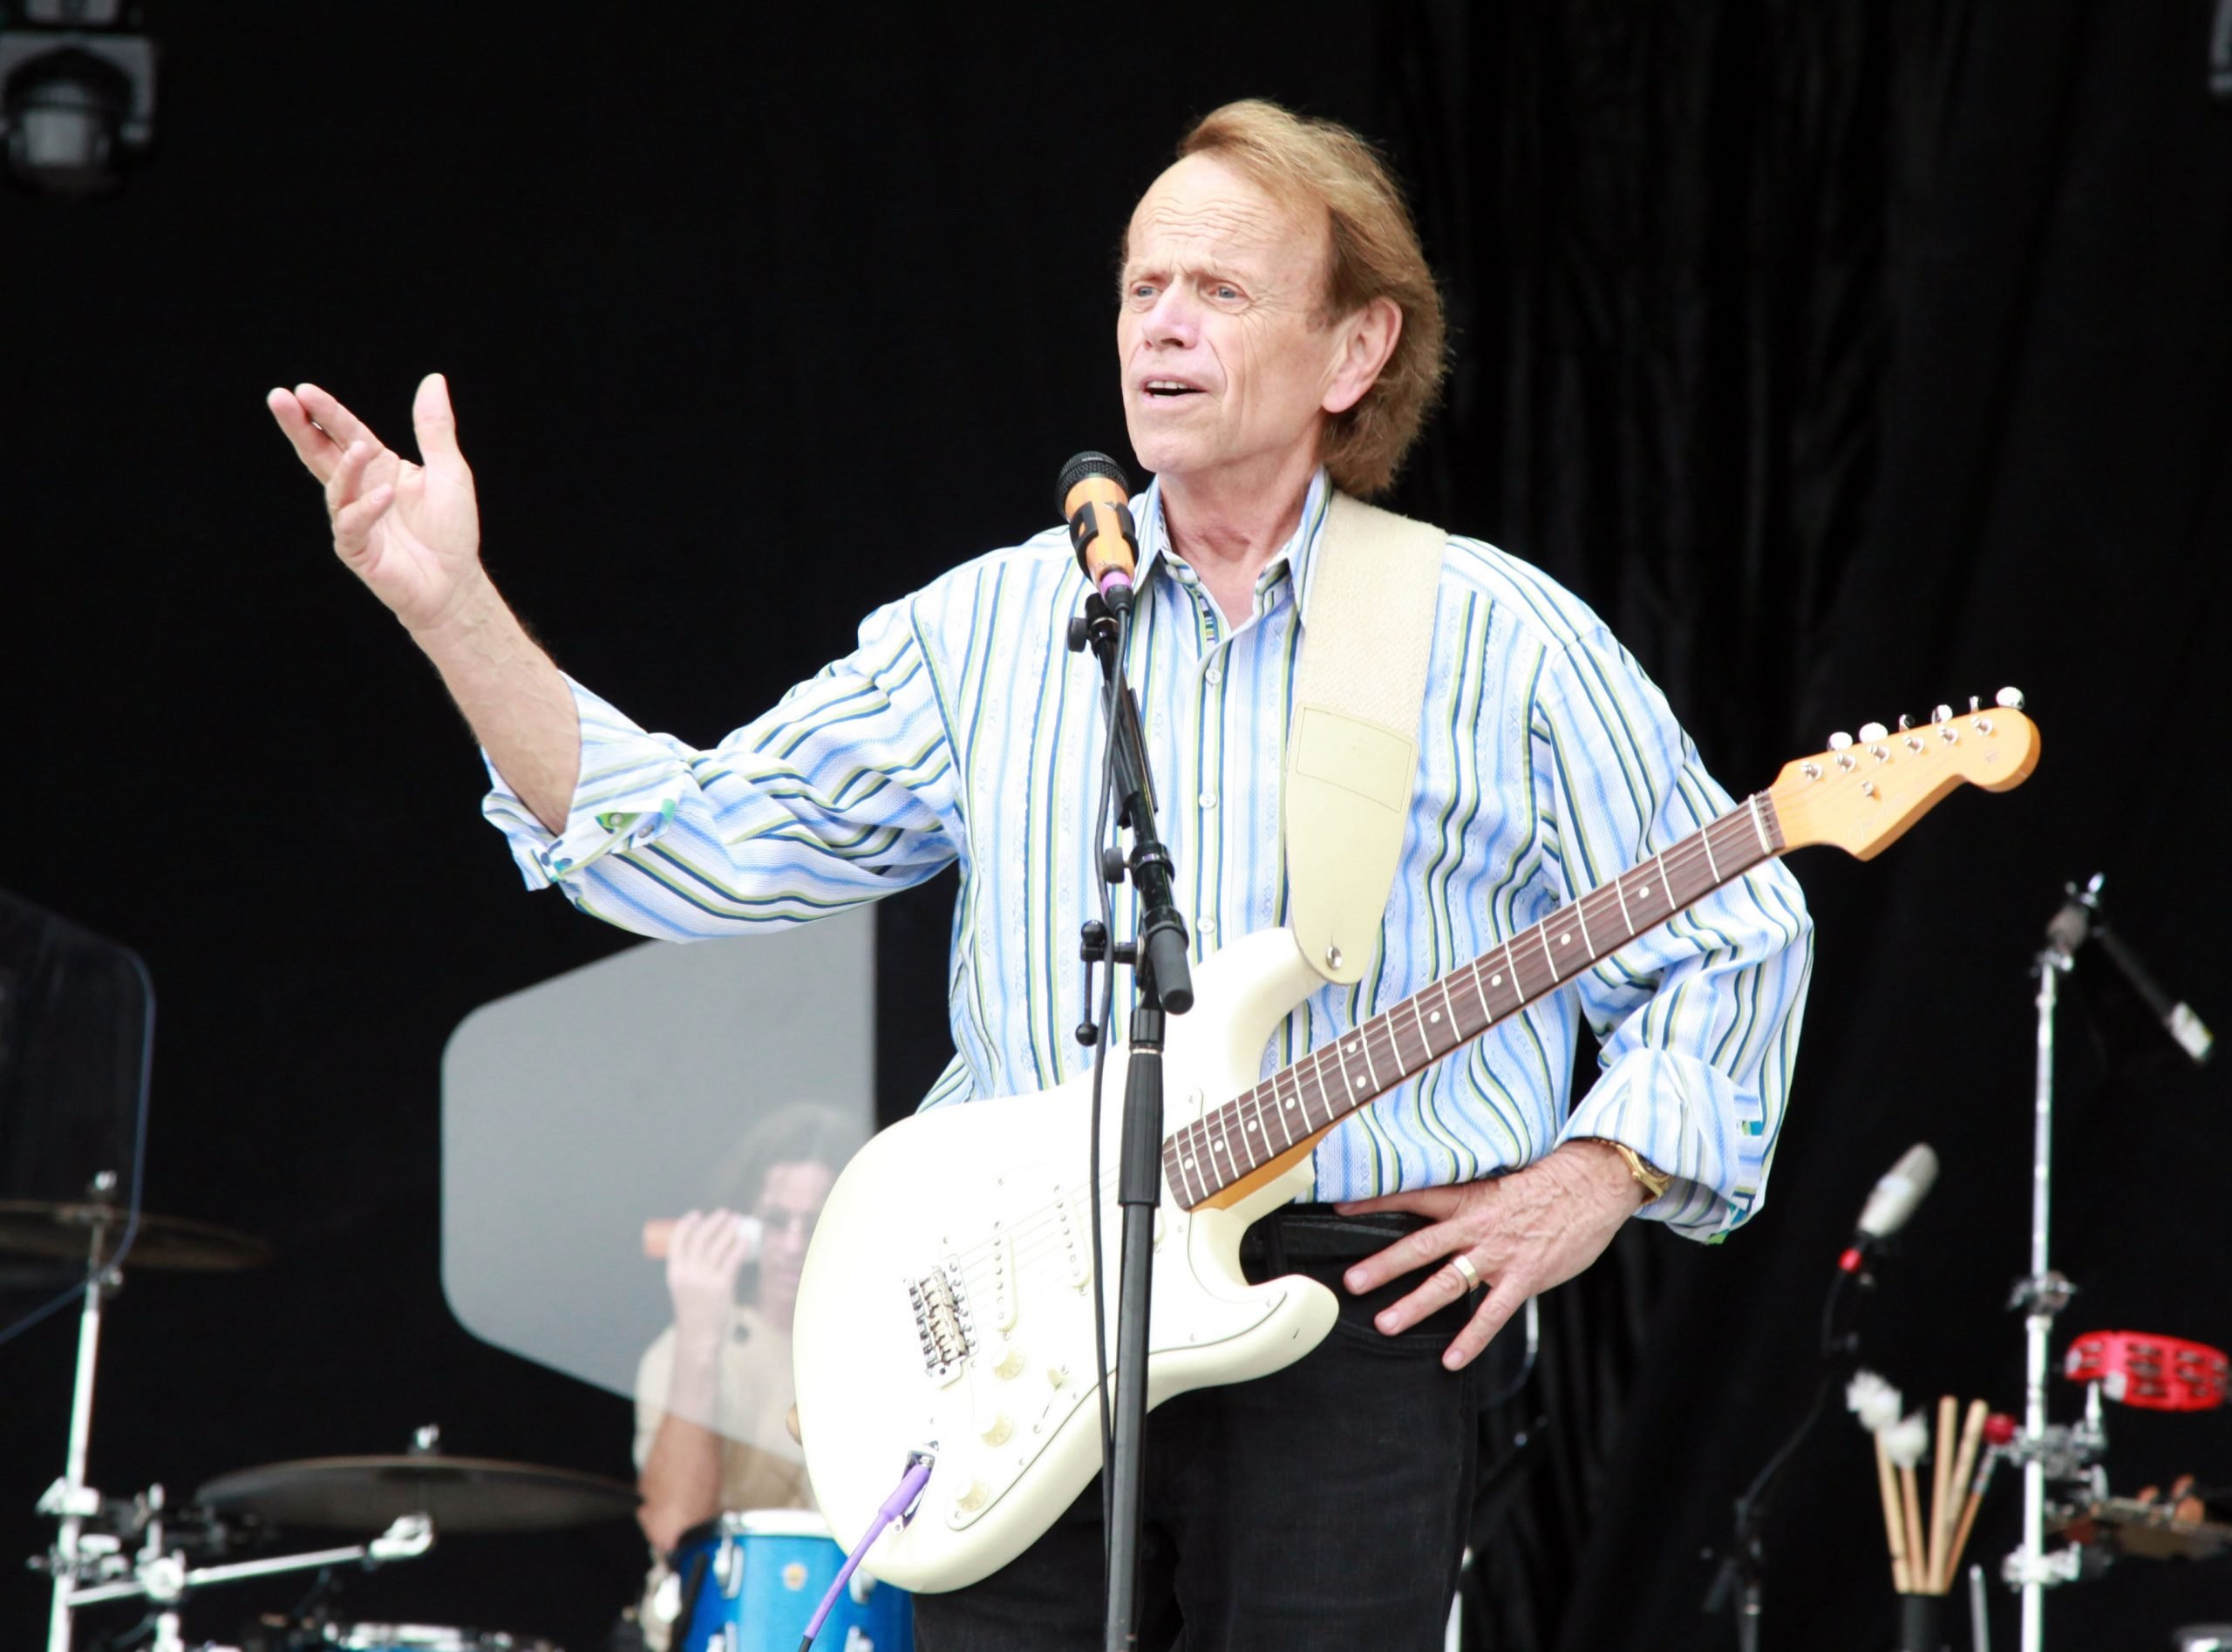 Musician Al Jardine of The Beach Boys performs onstage during Day 4 of Bonnaroo 2012